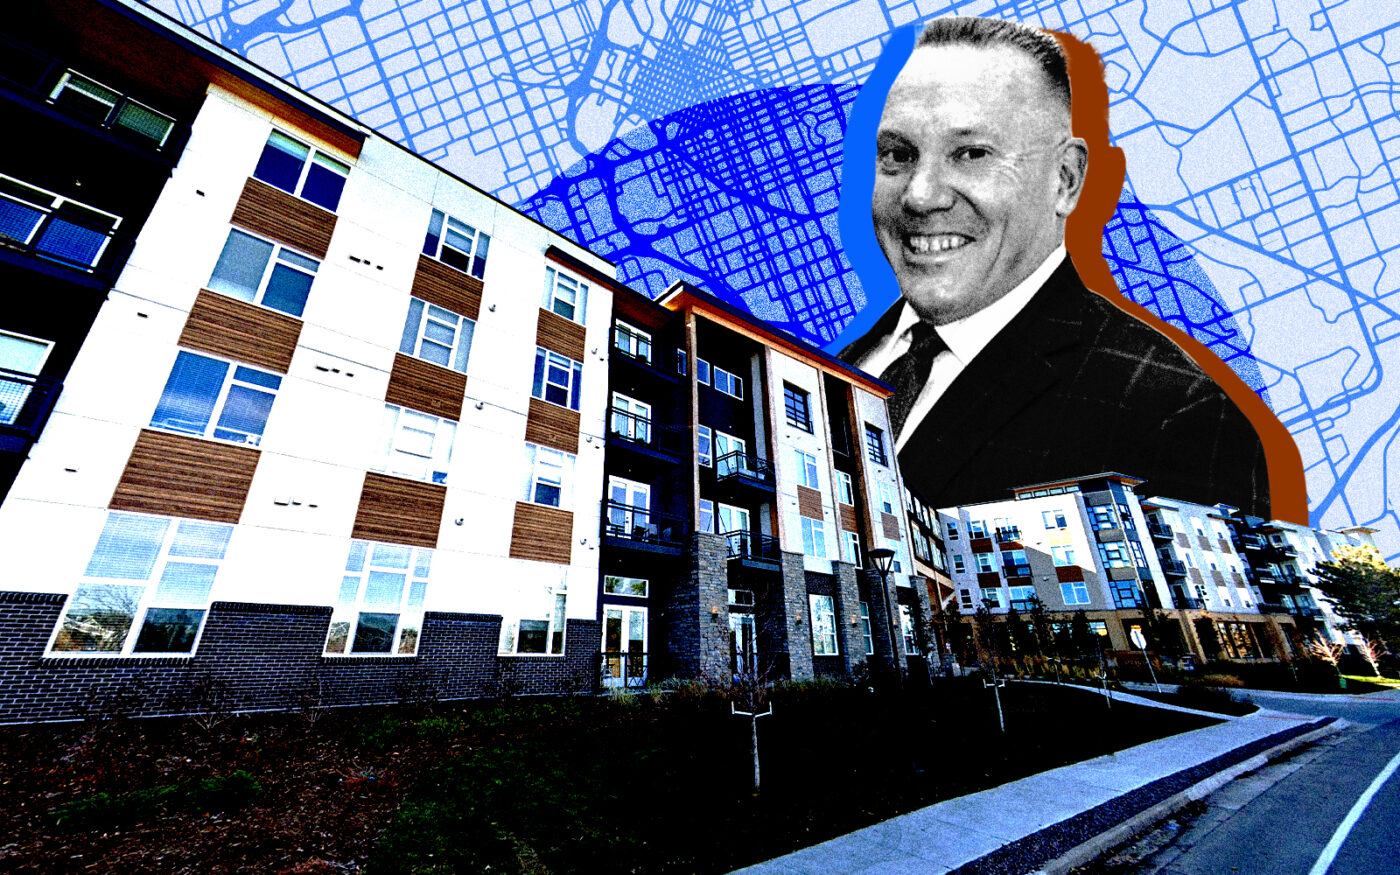 Connor Group Buys Denver-Area Multifamily Complex For $100M